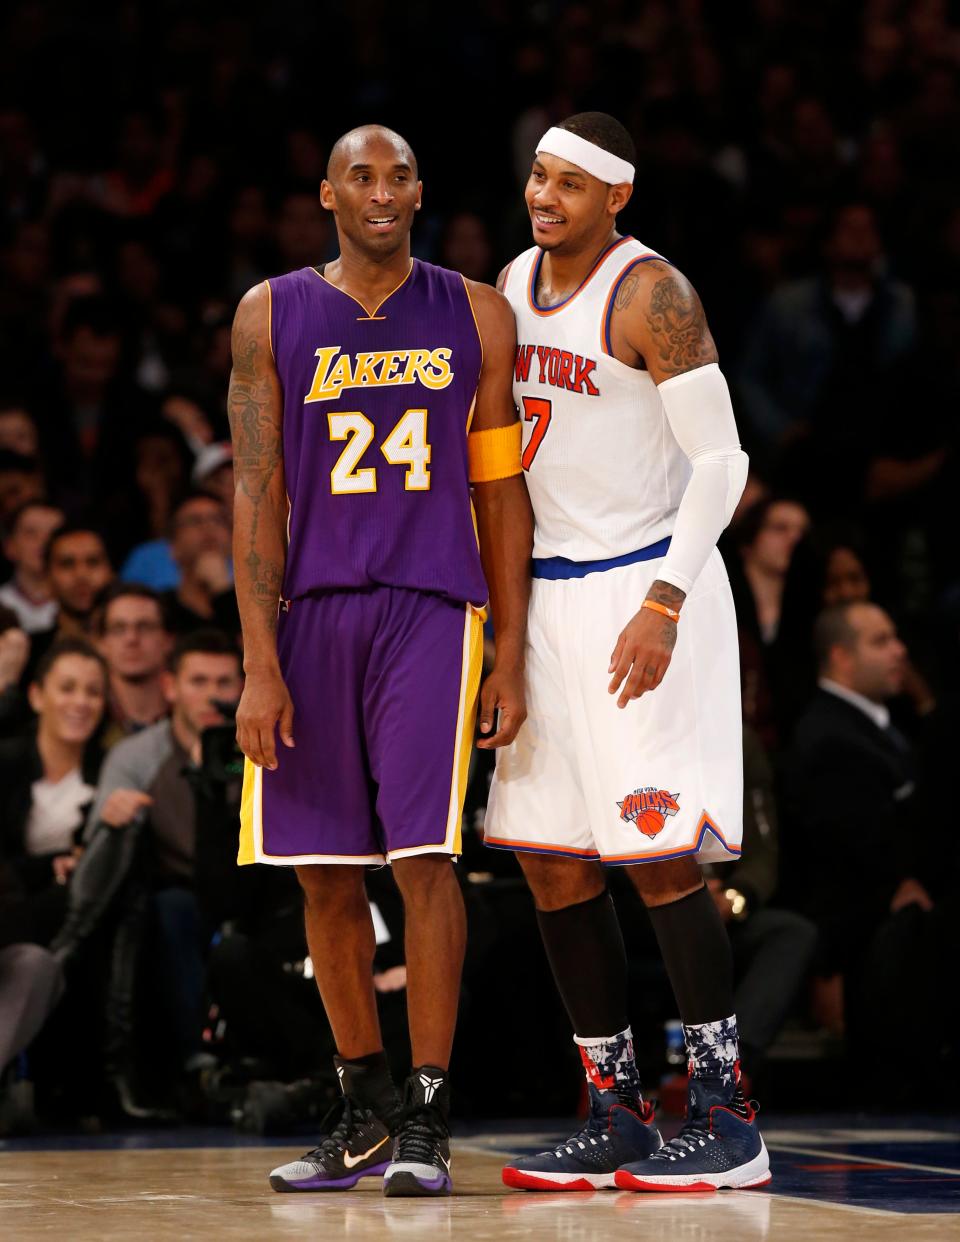 Los Angeles Lakers forward Kobe Bryant (24) chats with New York Knicks forward Carmelo Anthony (7) during a lull in play in the second half of an NBA basketball game at Madison Square Garden in New York, Sunday, Nov. 8, 2015.